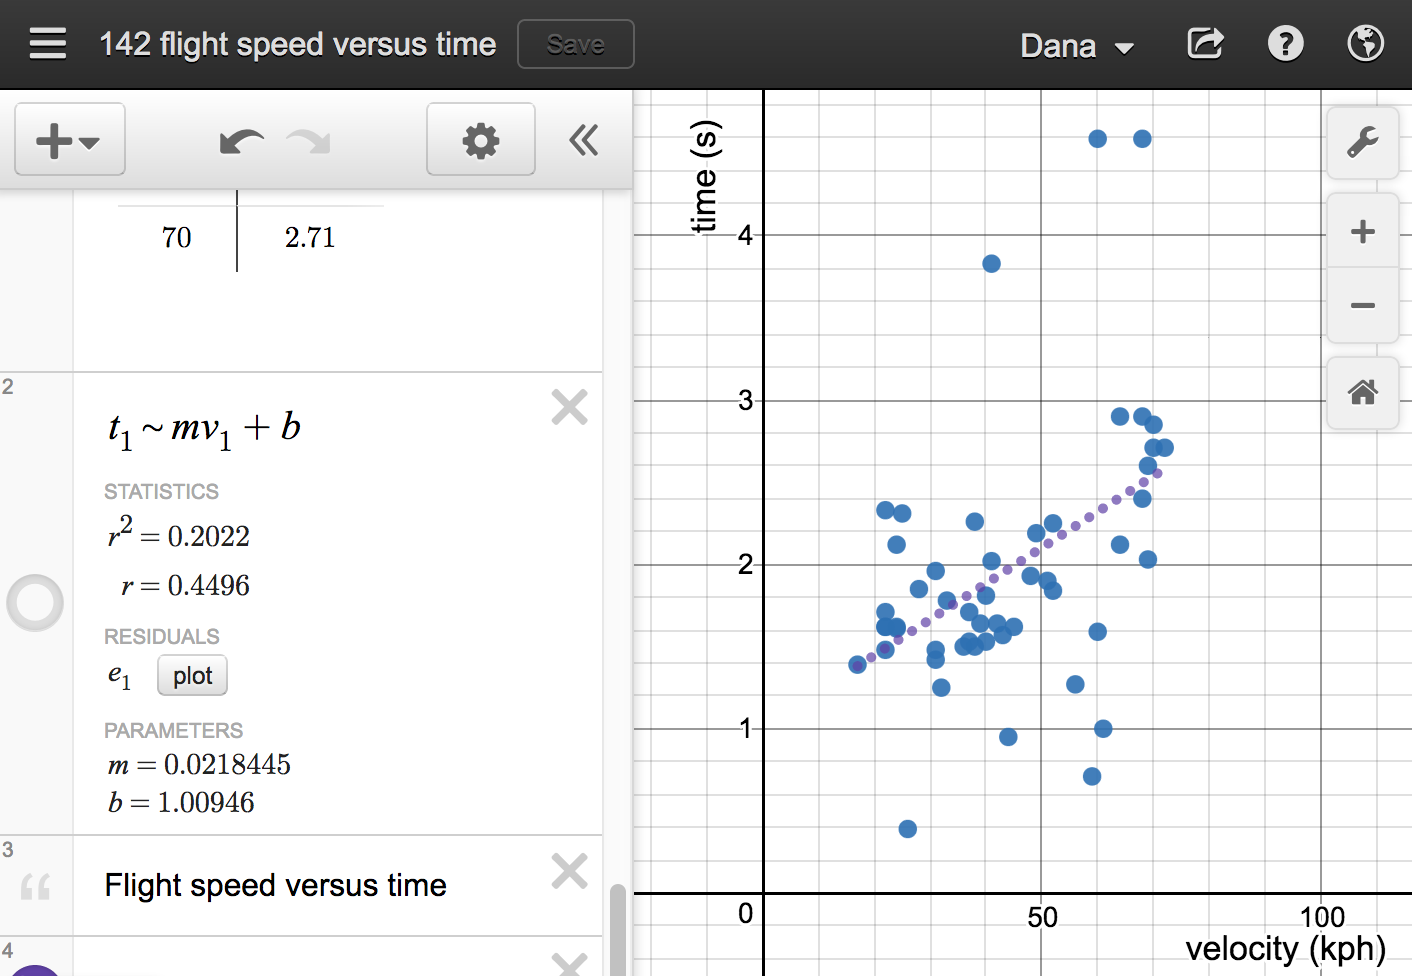 Lab 14 data and graph velocity versus flight time